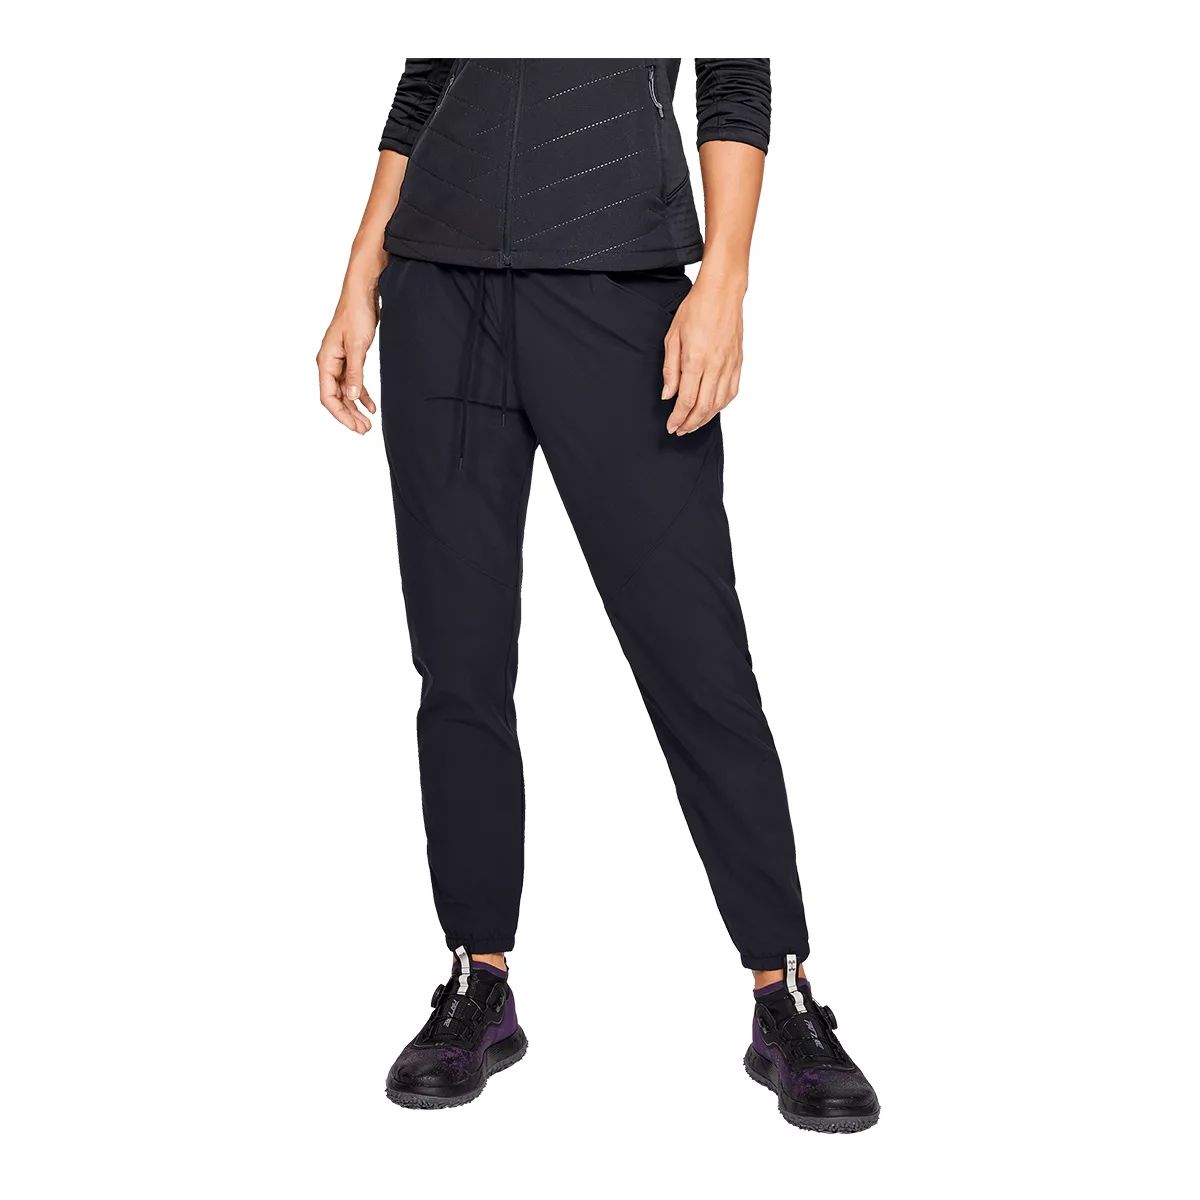 https://media-www.atmosphere.ca/product/div-03-softgoods/dpt-72-casual-clothing/sdpt-02-womens/333029498/ua-w-fusion-pant-s20-blk-black-xs--97b494bf-7ab9-4ccd-9491-7bcb4d84604a-jpgrendition.jpg